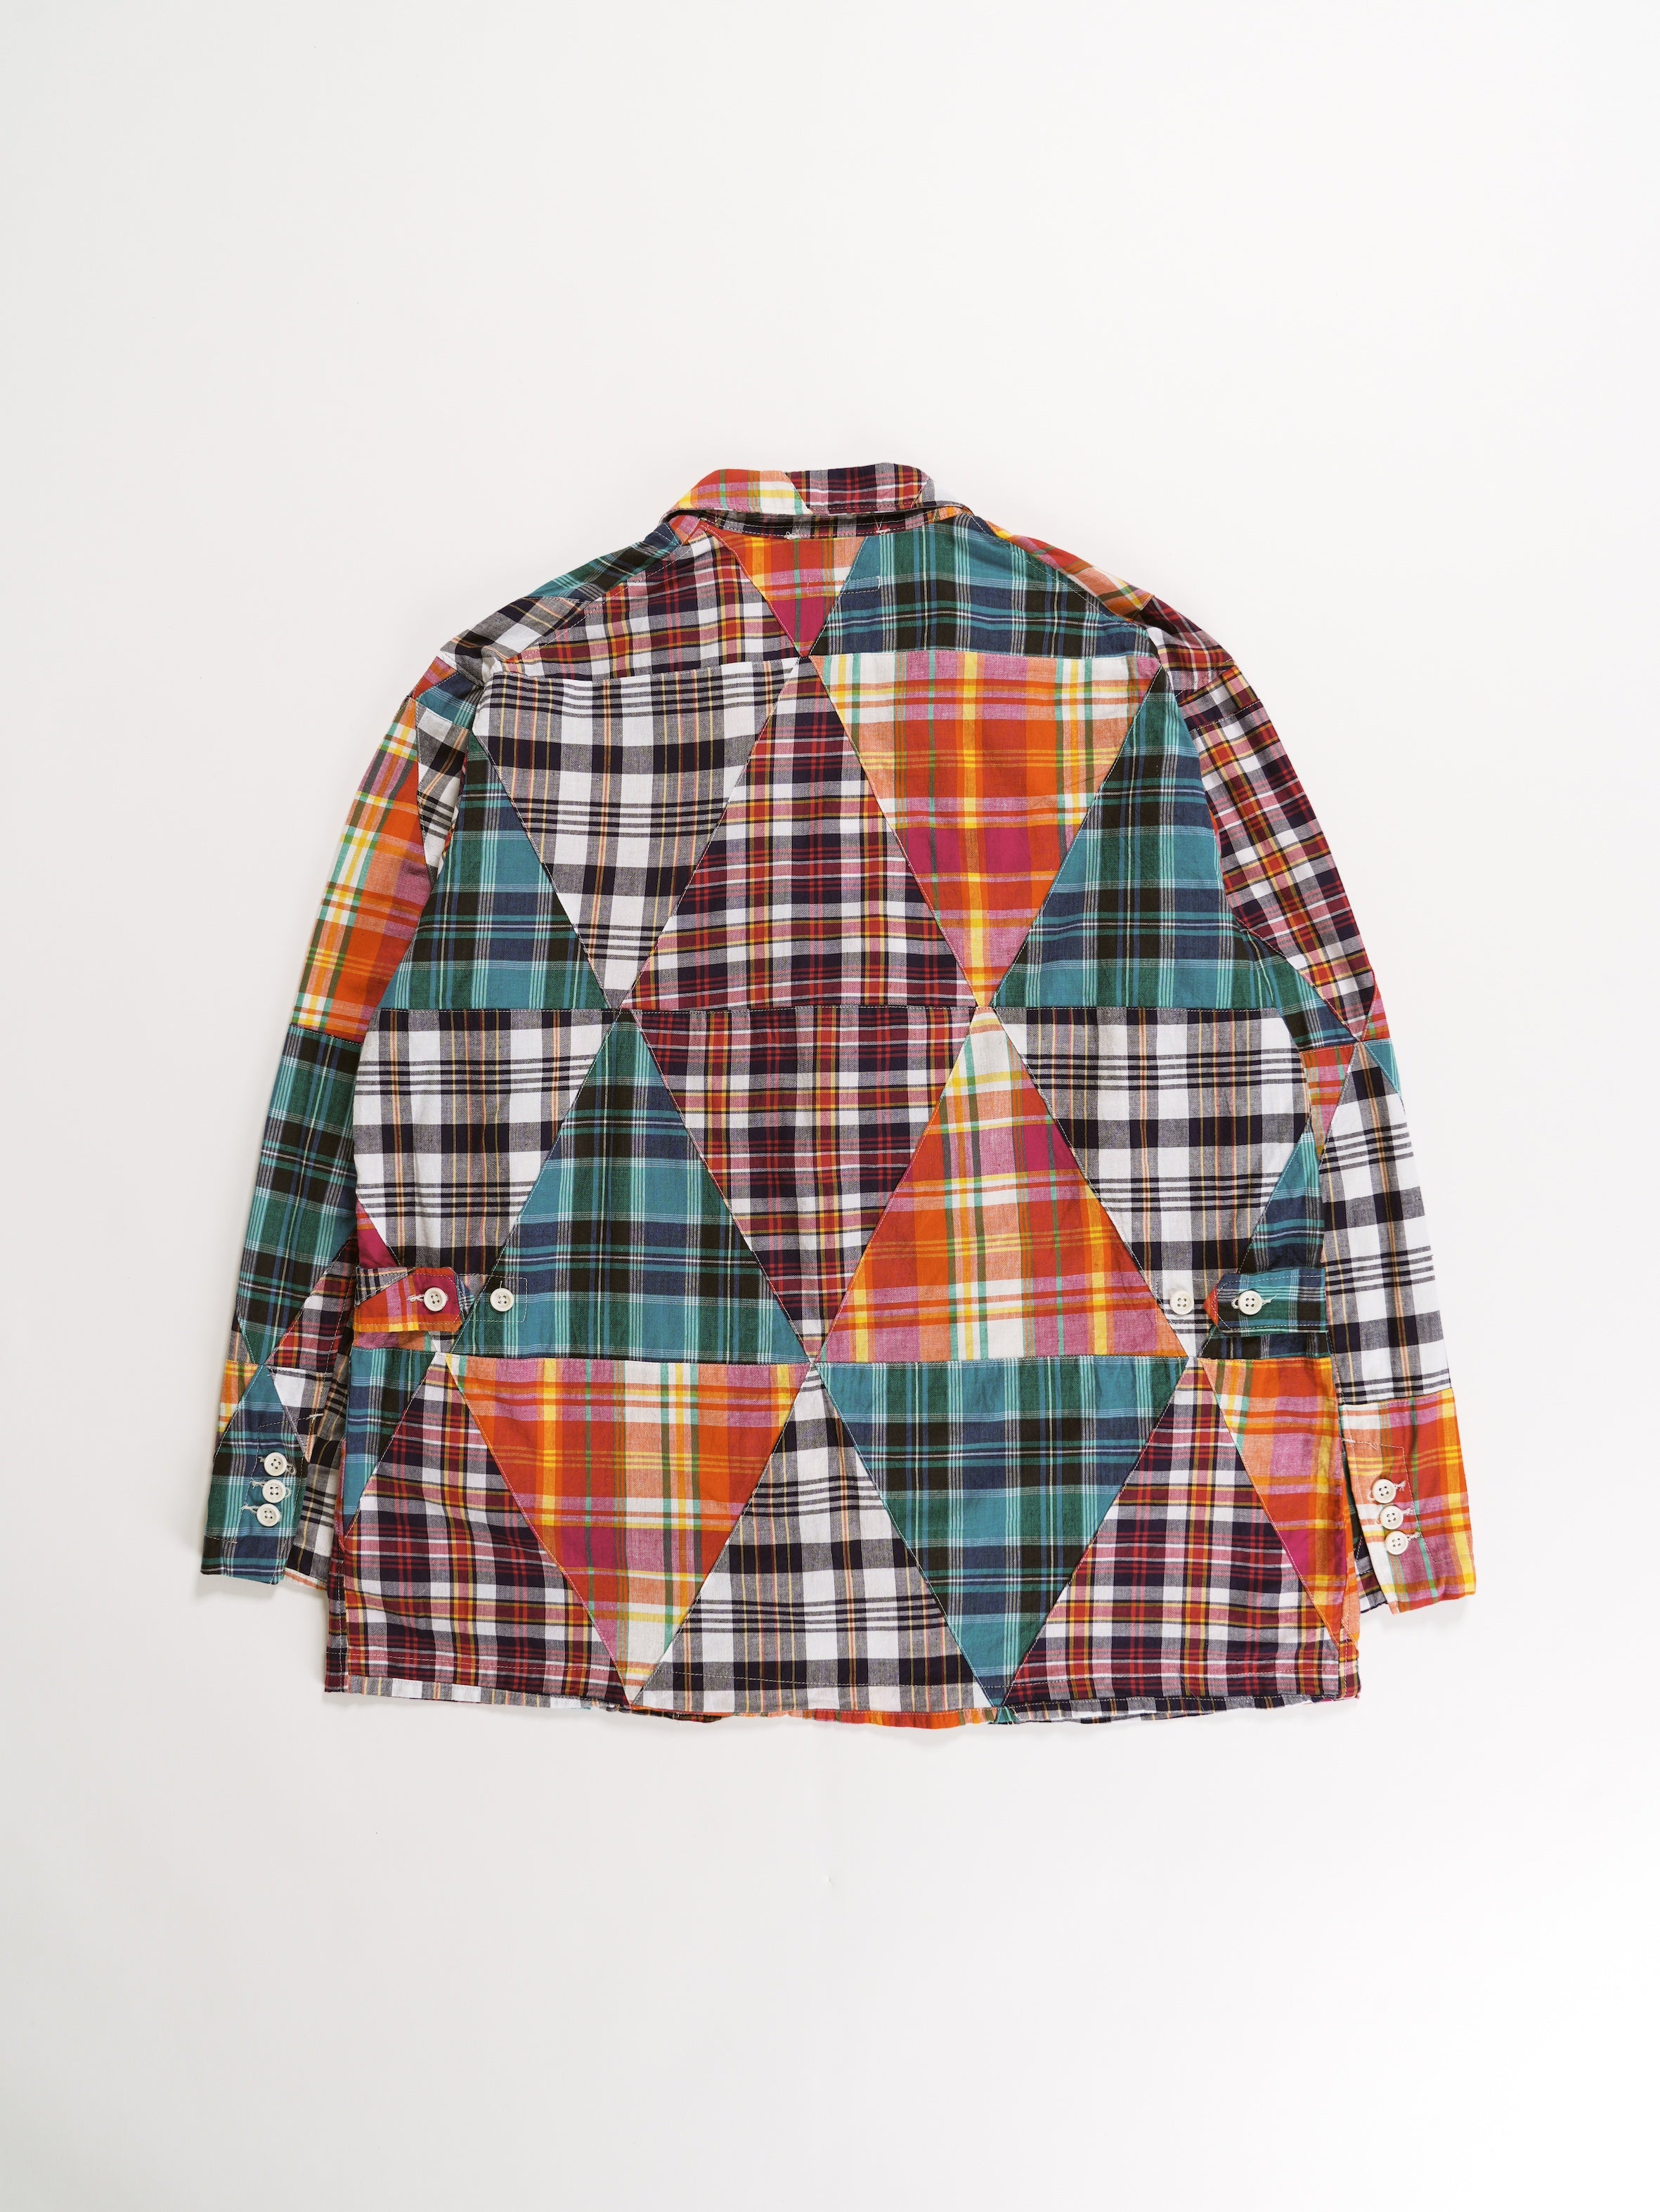 Engineered Garments Loiter Jacket - Multi Color Triangle Patchwork Madras